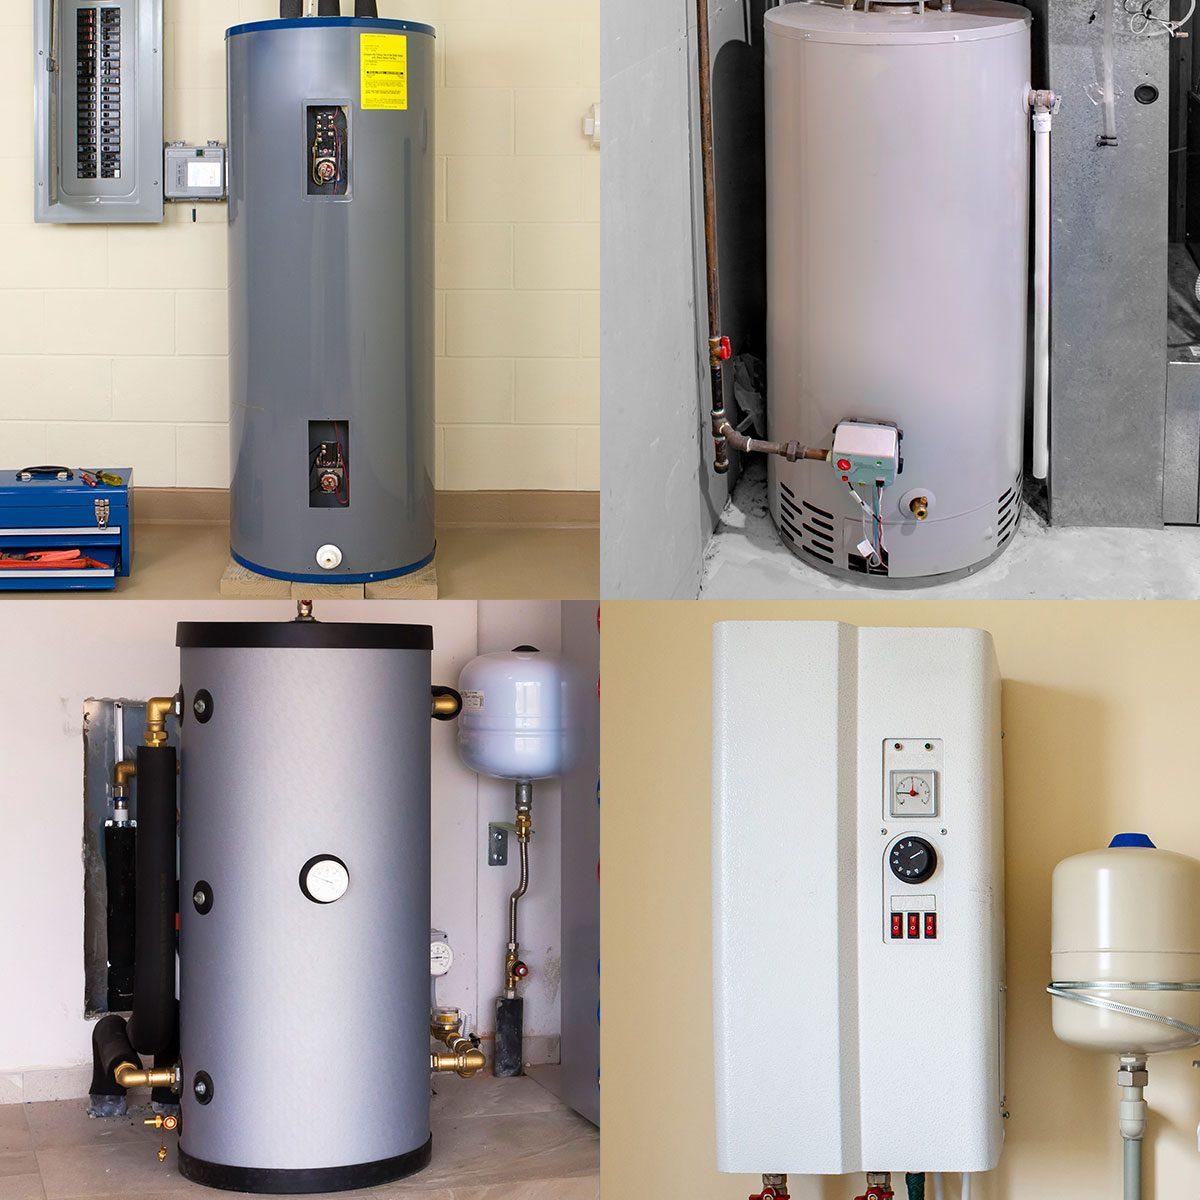 New Homeowners Guide To Water Heaters Ft Via Getty.com  